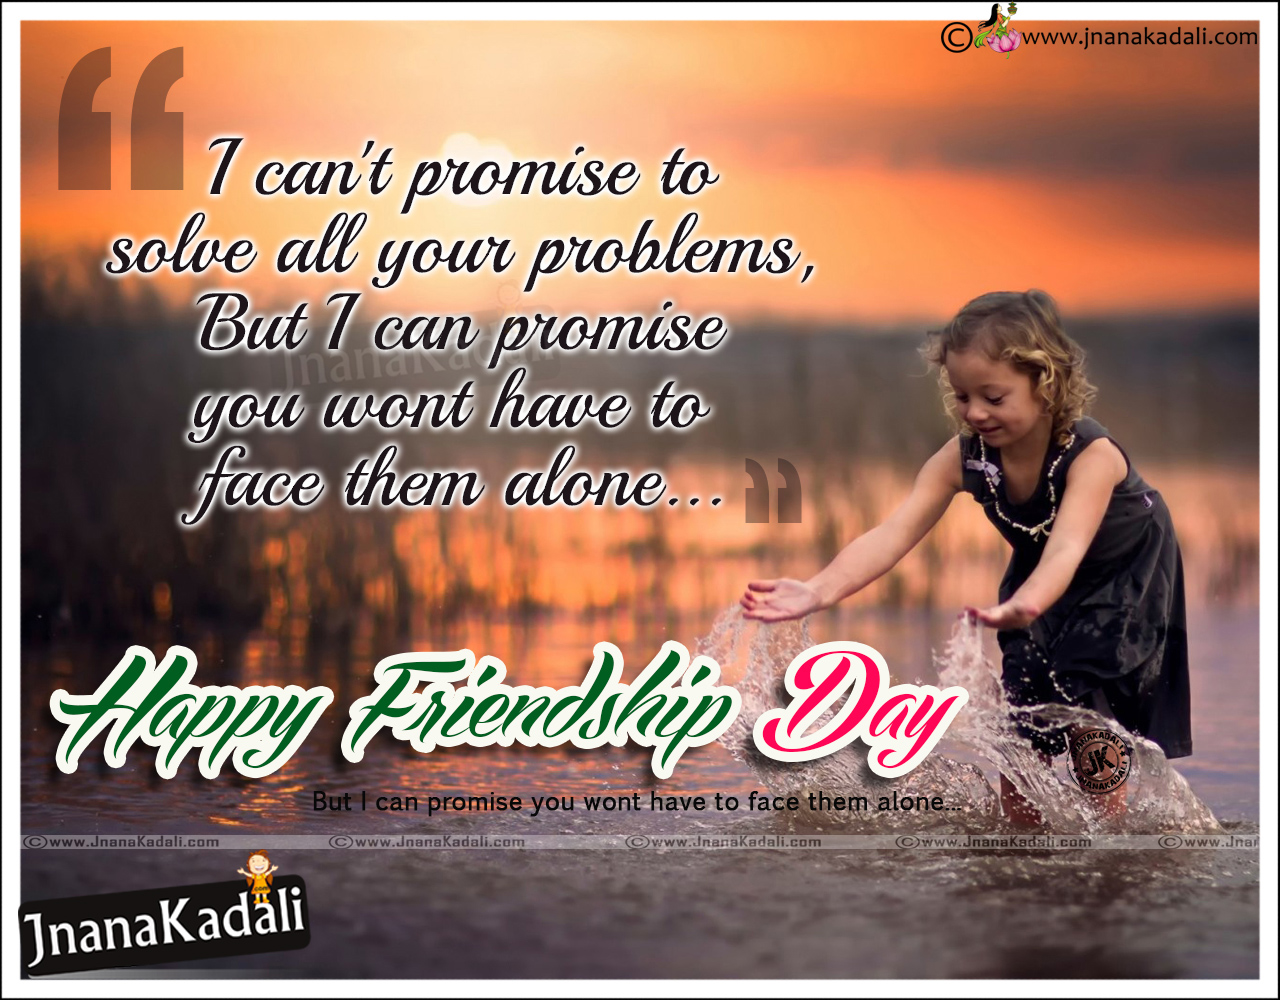 Happy Friendship Day English latest Messages with HD wallpaper International Friendship Day messages Greetings. JNANA KADALI.COM. Telugu Quotes. English quotes. Hindi quotes. Tamil quotes. Dharmasandehalu